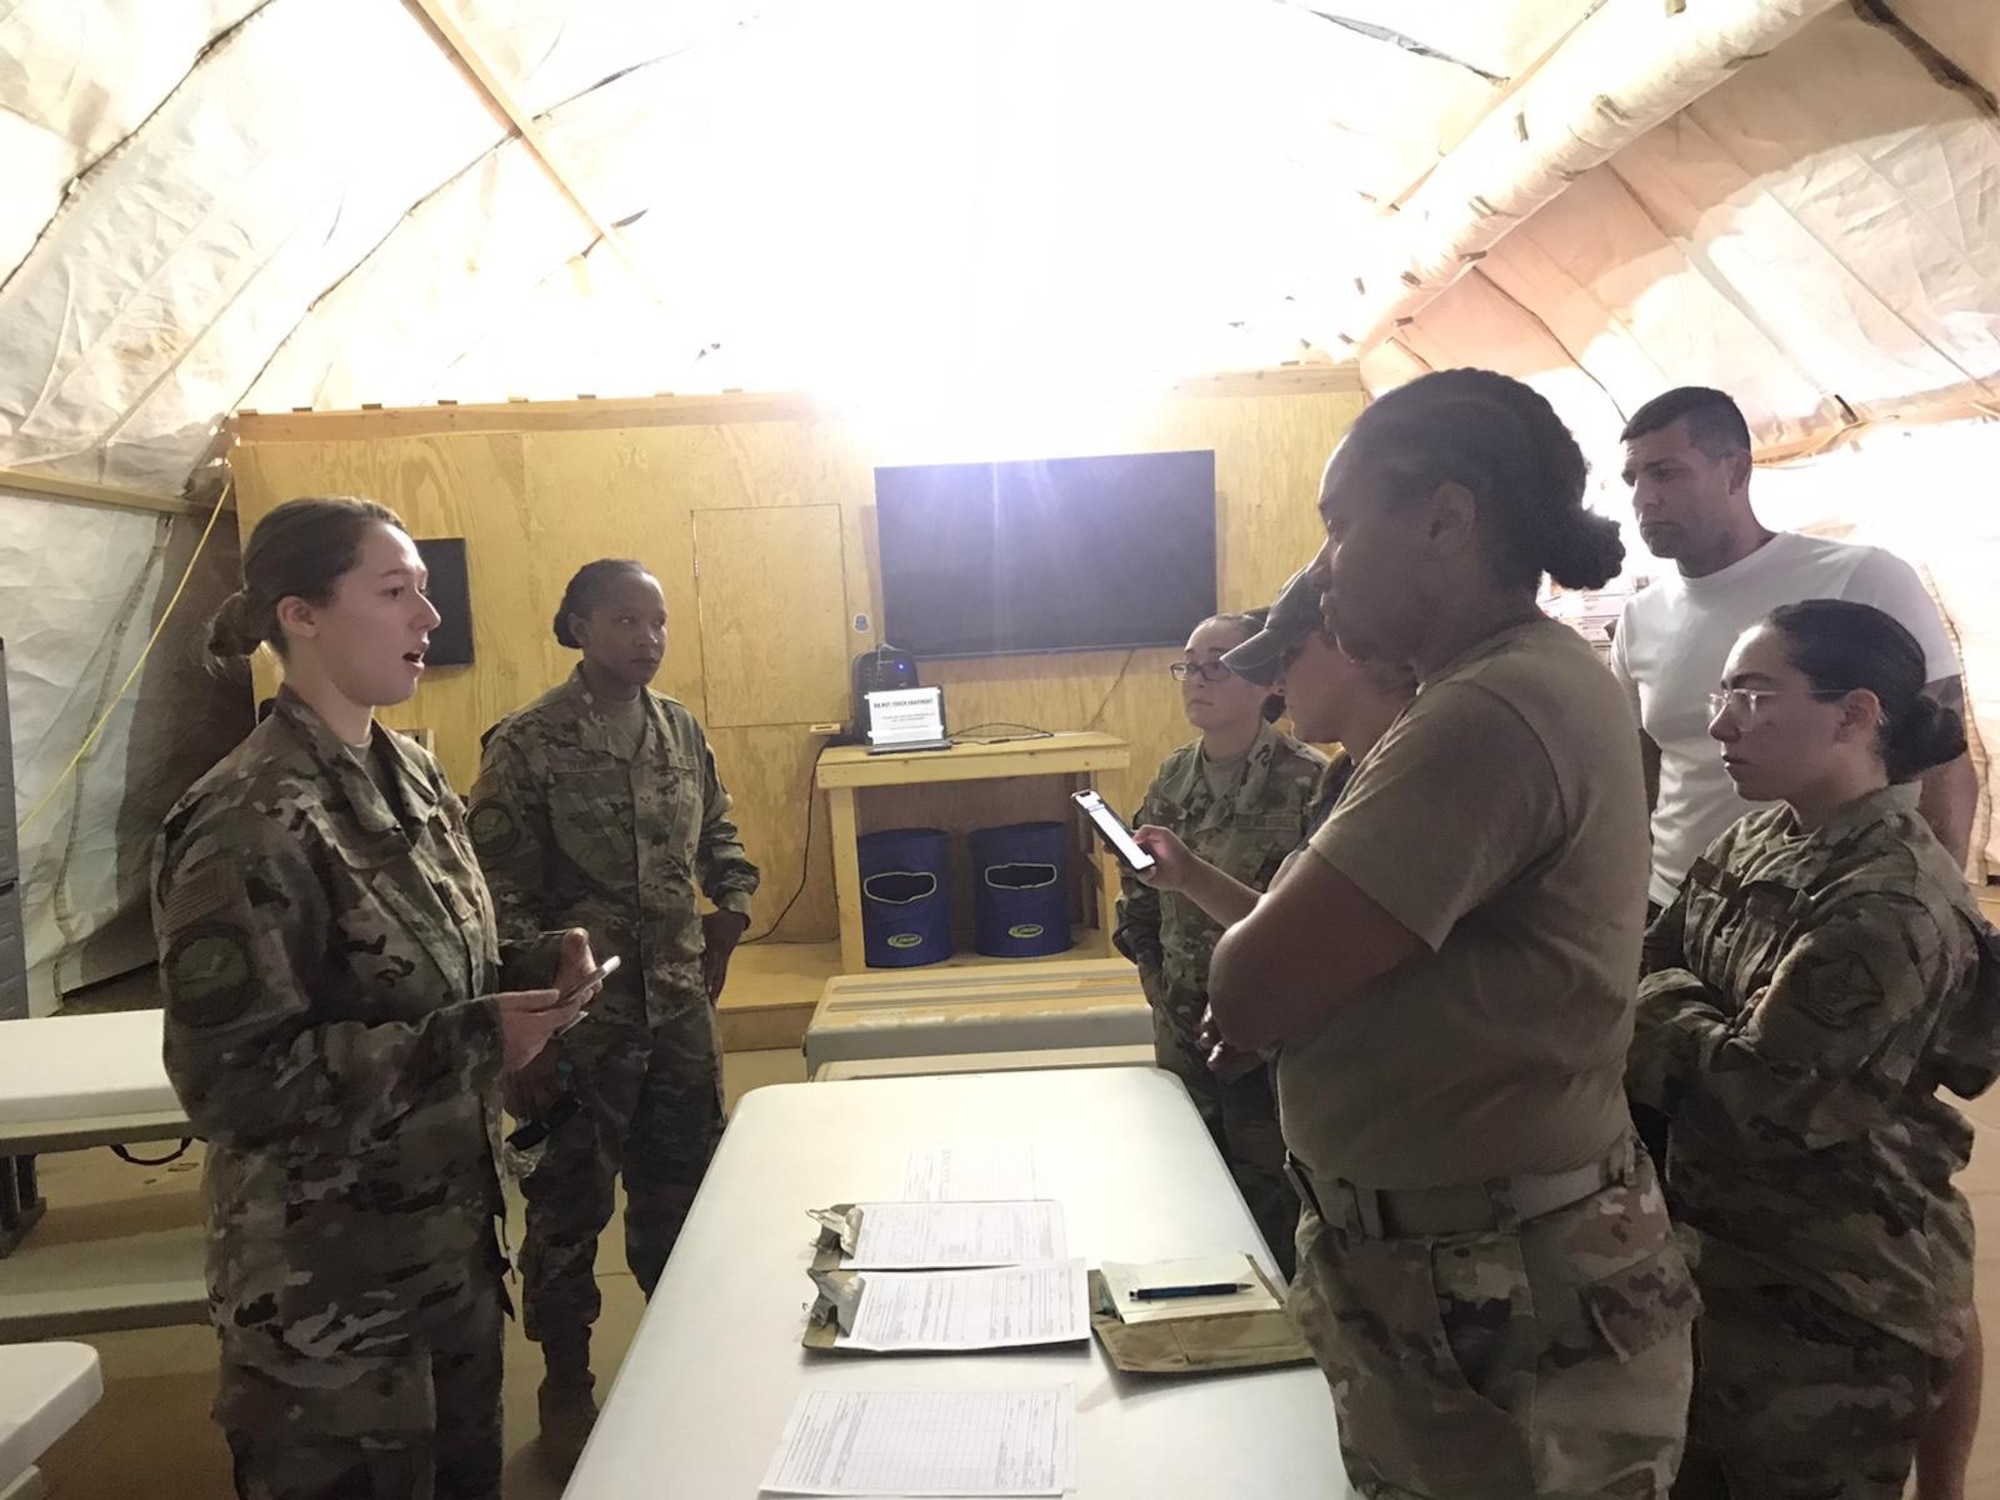 U.S. Airmen from the 768th Expeditionary Air Base Squadron Mortuary Affairs team exercises coordinating next of kin notifications with the Logistics Readiness Flight and Personnel Support for Contingency Operations during a short-notice Mortuary Affairs exercise at Nigerian Air Base 101, Niamey, Niger, Oct. 9, 2020.